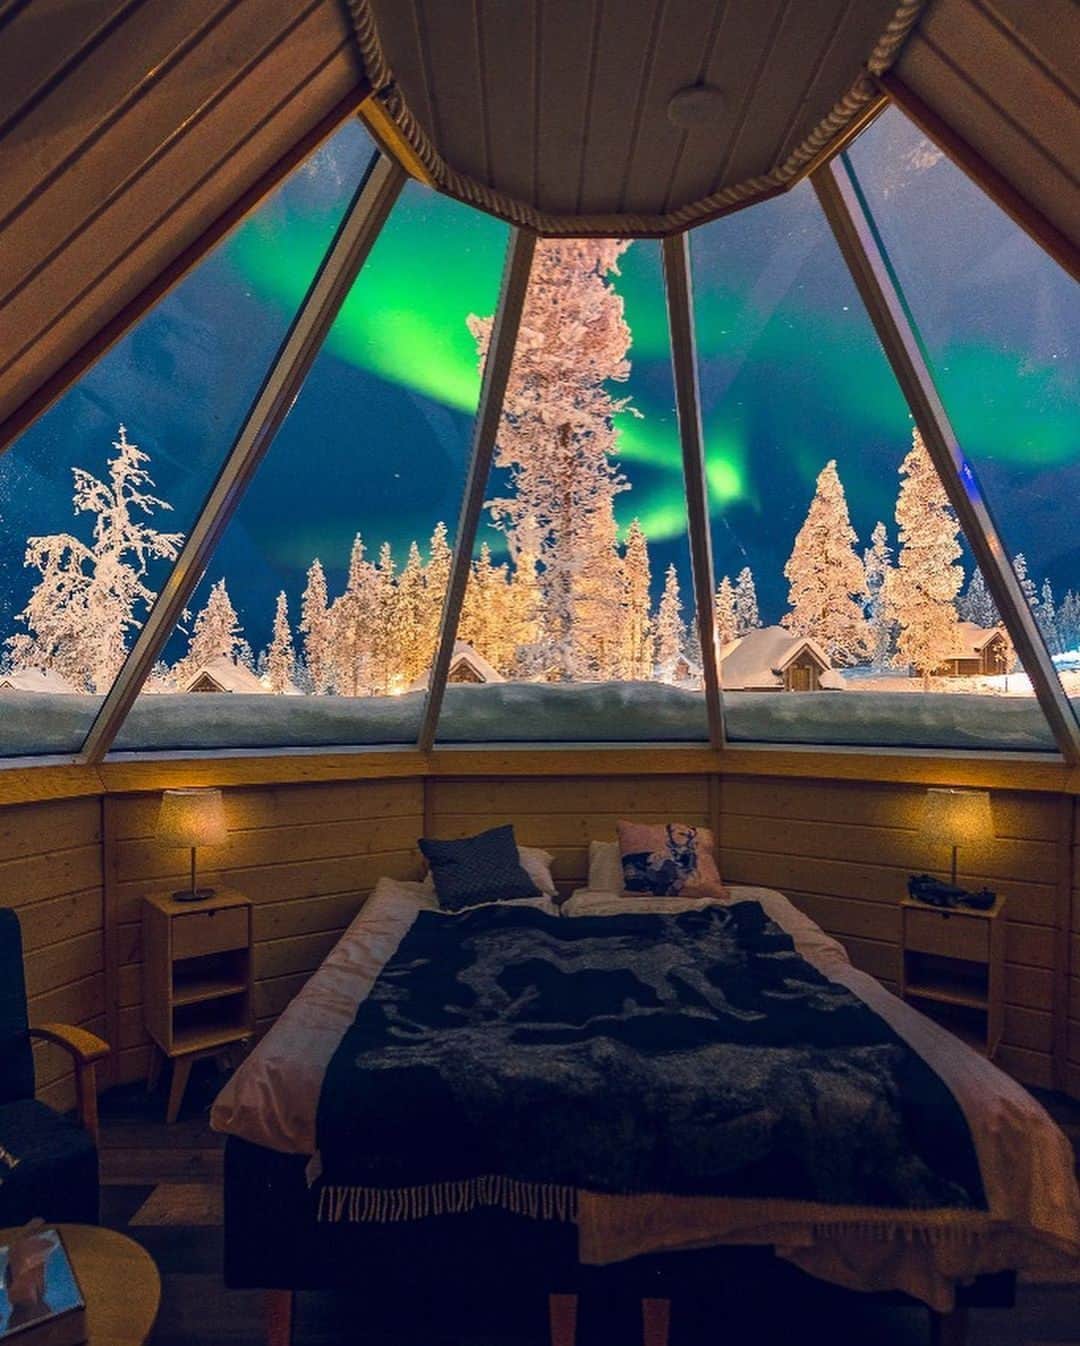 PicLab™ Sayingsのインスタグラム：「Goodnight from one of the most beautiful bedroom views in the world in Lapland. 🇫🇮 Can you imagine falling asleep to this gorgeous display? We wouldn't want to miss a second!  📸@alaa_oth」